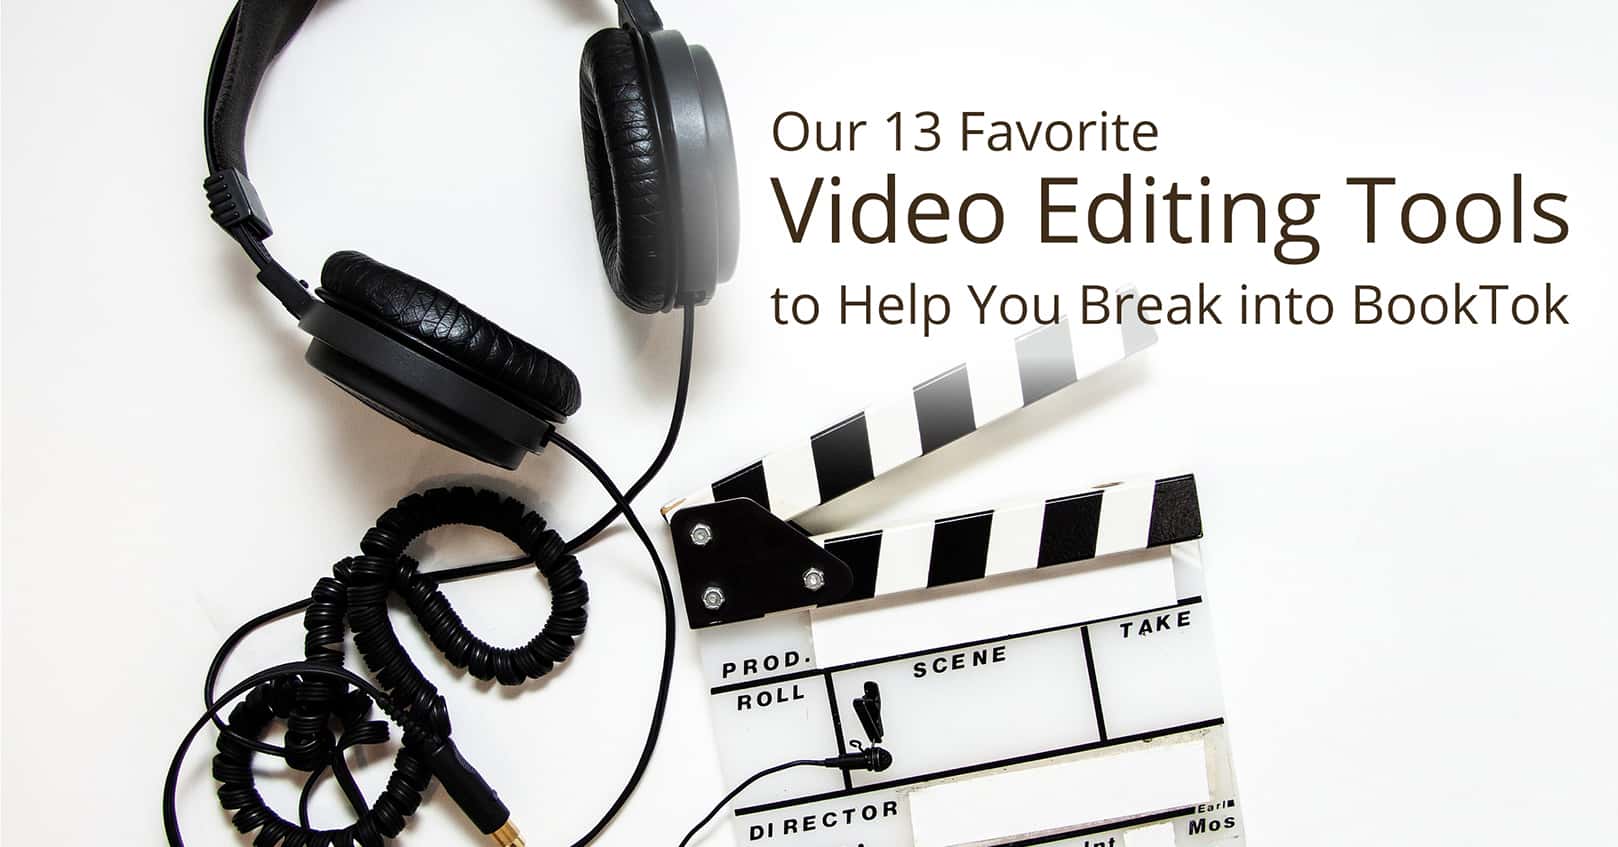 Our 13 Favorite Video Editing Tools to Help You Break into BookTok